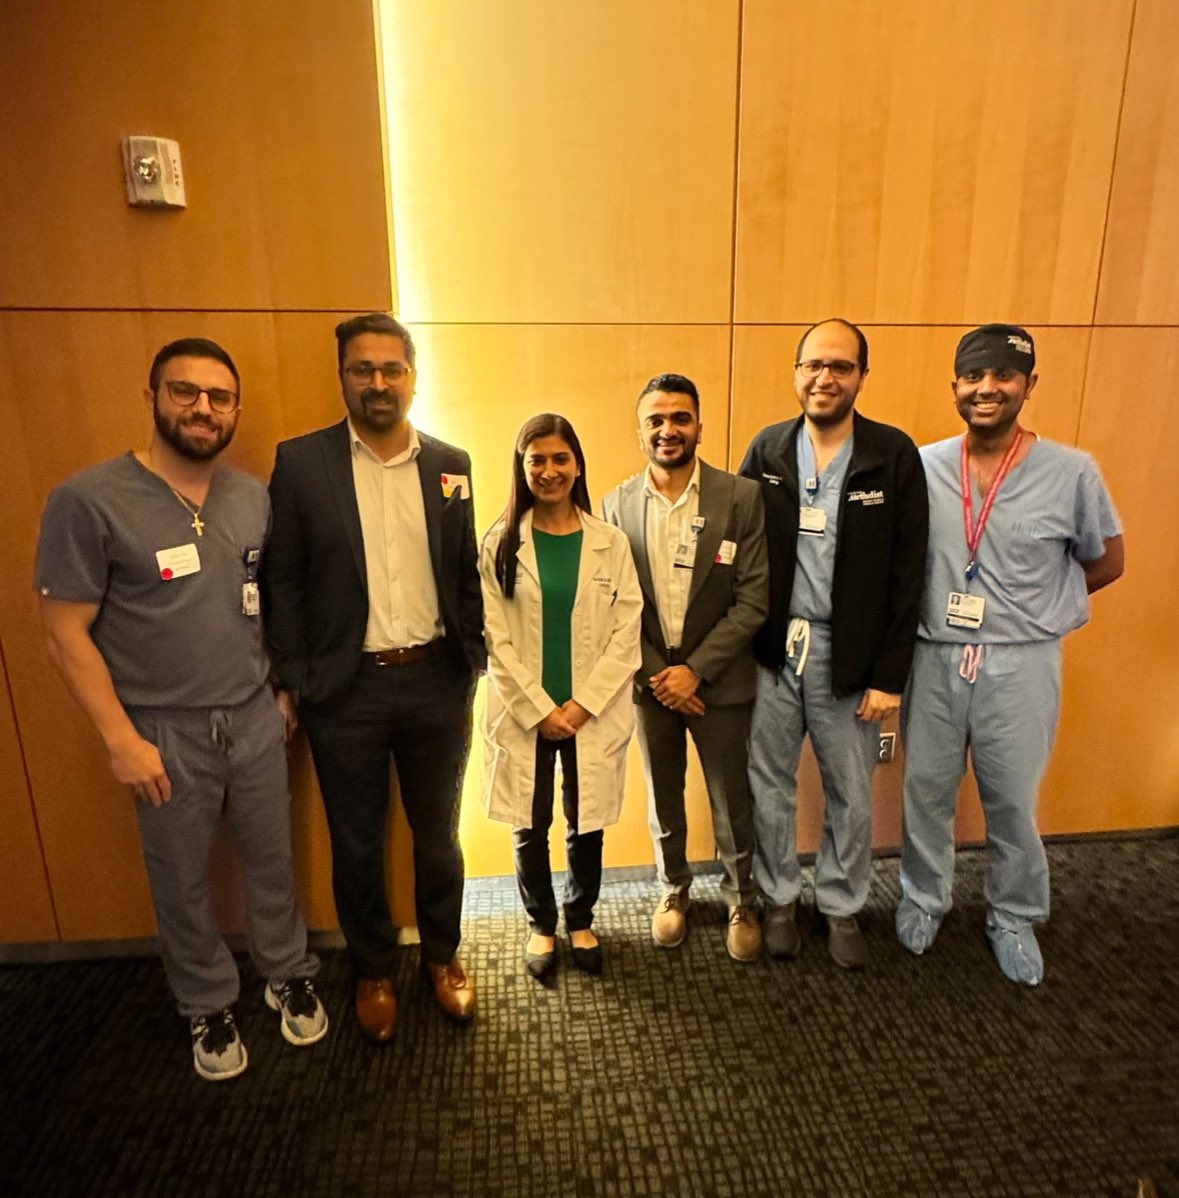 Very proud of our @HMHCardioFellow for participating in the inaugural GME research day and masterfully presenting their outstanding research projects! 👏 #Cardiotwitter #ACCFIT @thakkar_samarth @SammourMD @safinmc @Rody_BouChaaya